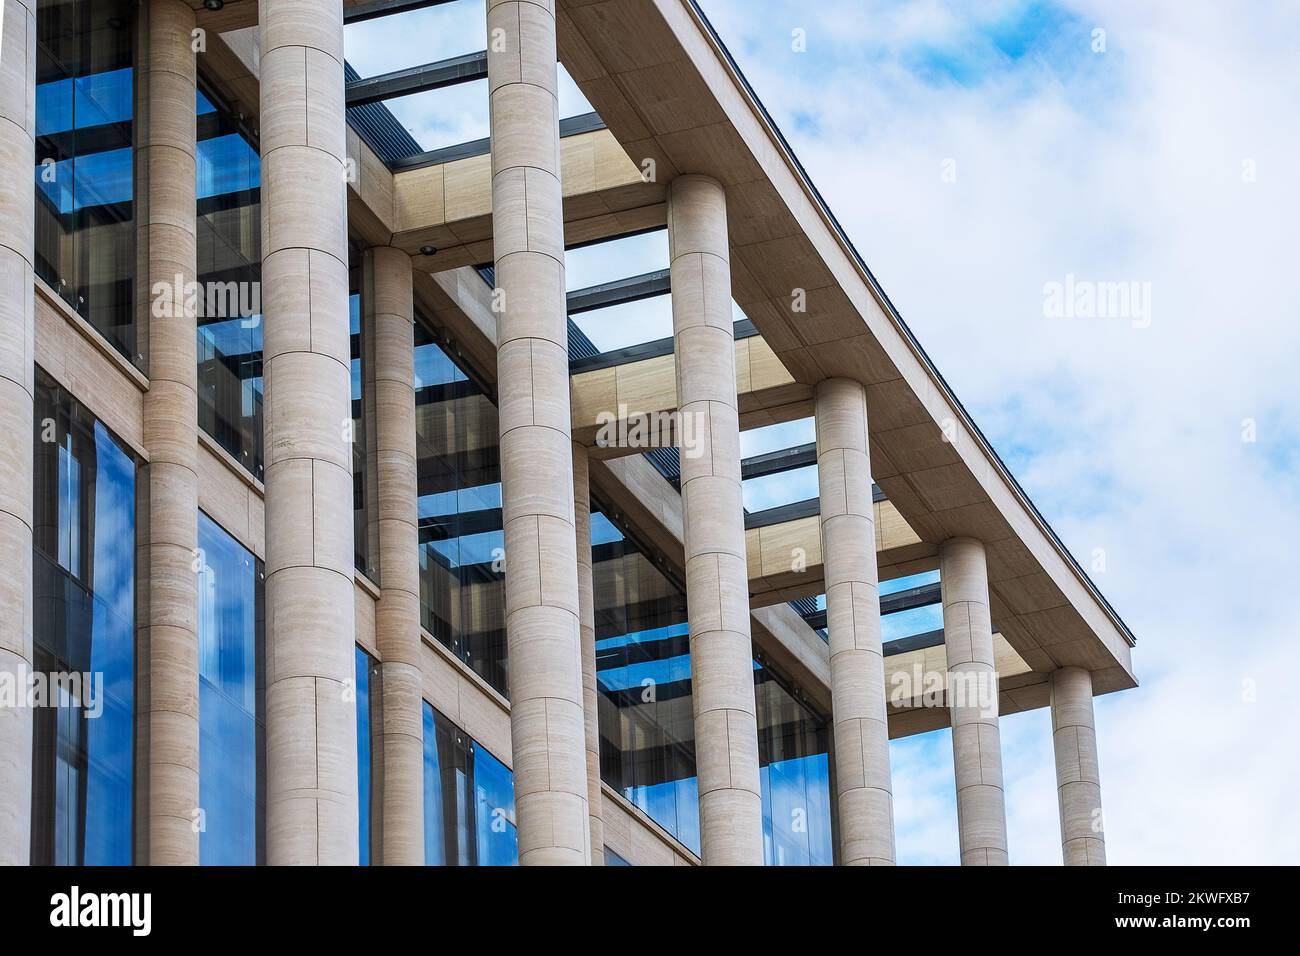 Fragment of the facade of a modern building with architectural columns Stock Photo